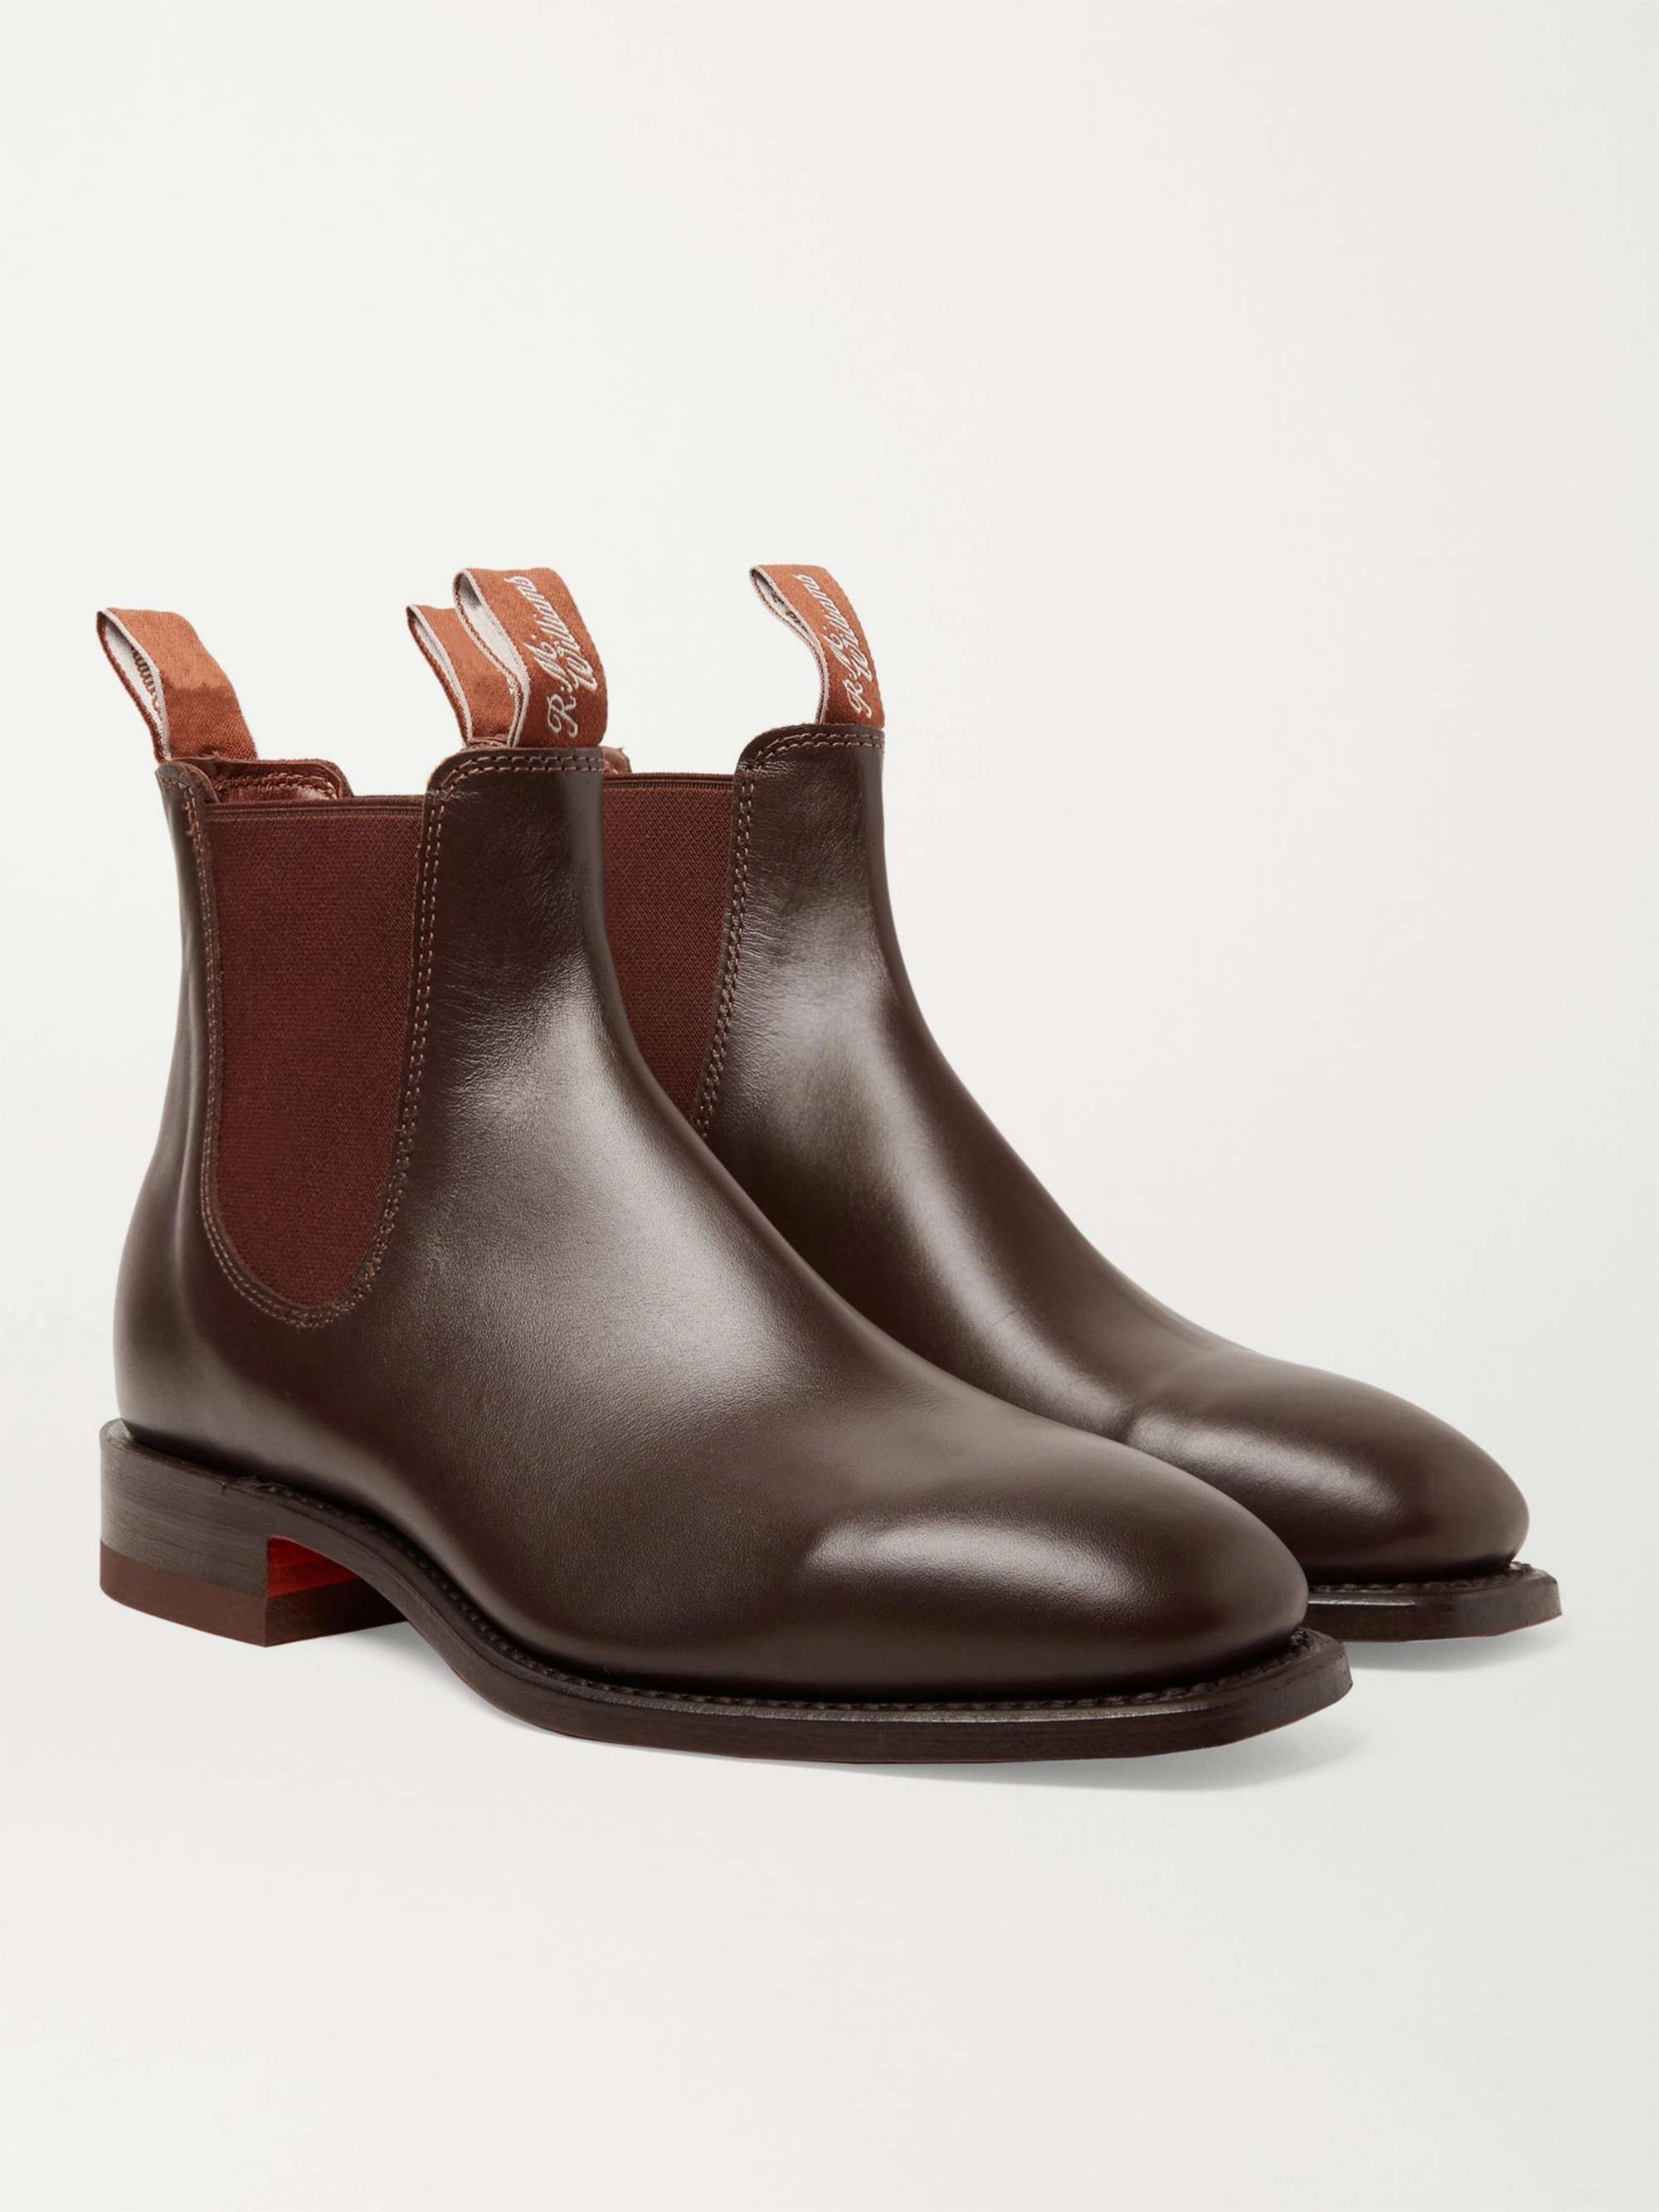 R.M.WILLIAMS Craftsman Leather Chelsea Boots | MR PORTER